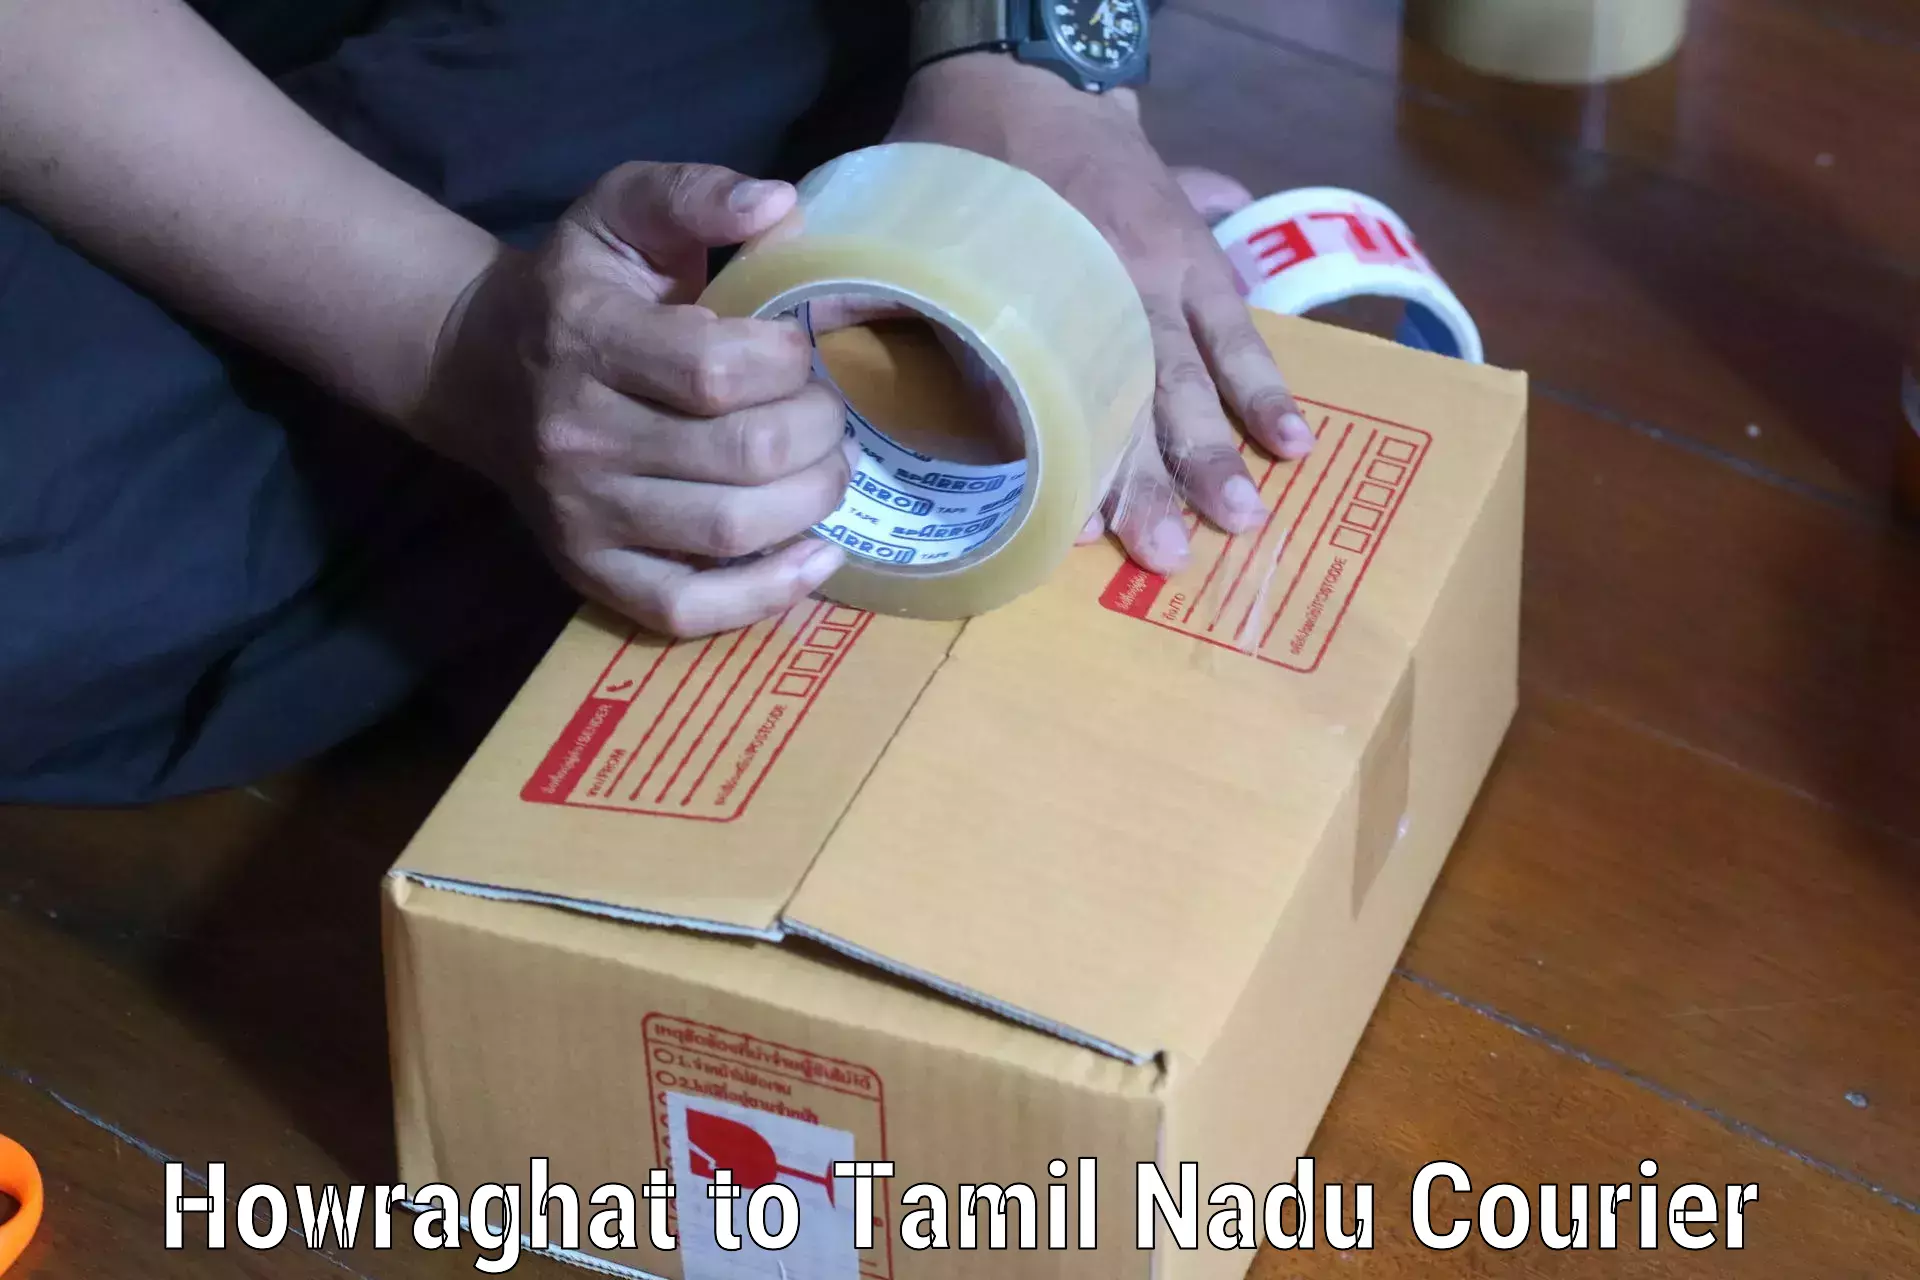 Courier service efficiency Howraghat to Mylapore